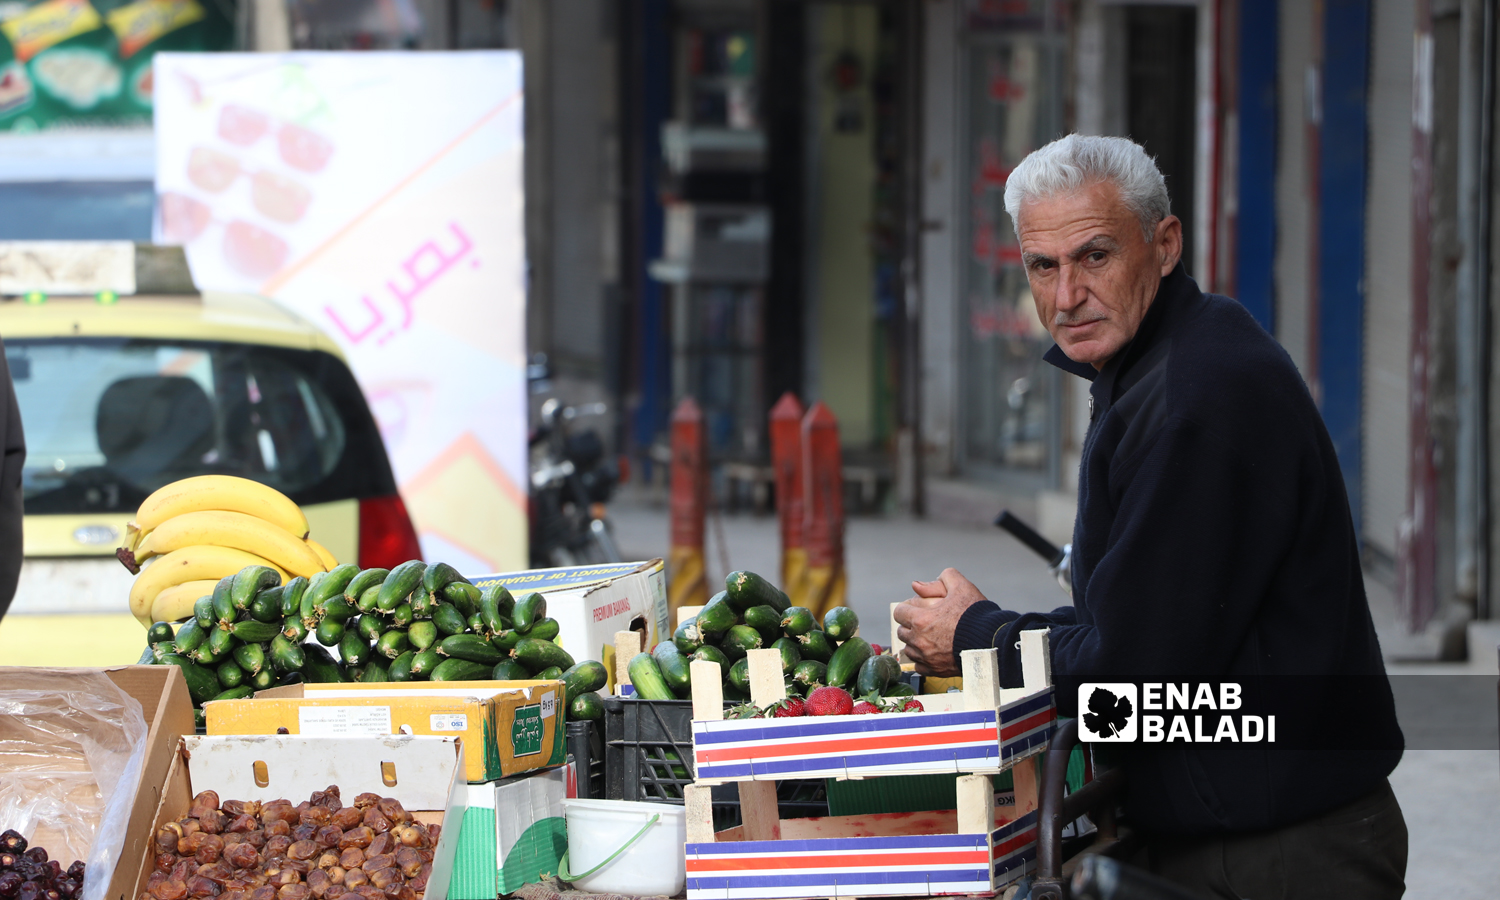 A vegetable and fruit seller leaning on his cart in the city of Idlib (Enab Baladi)